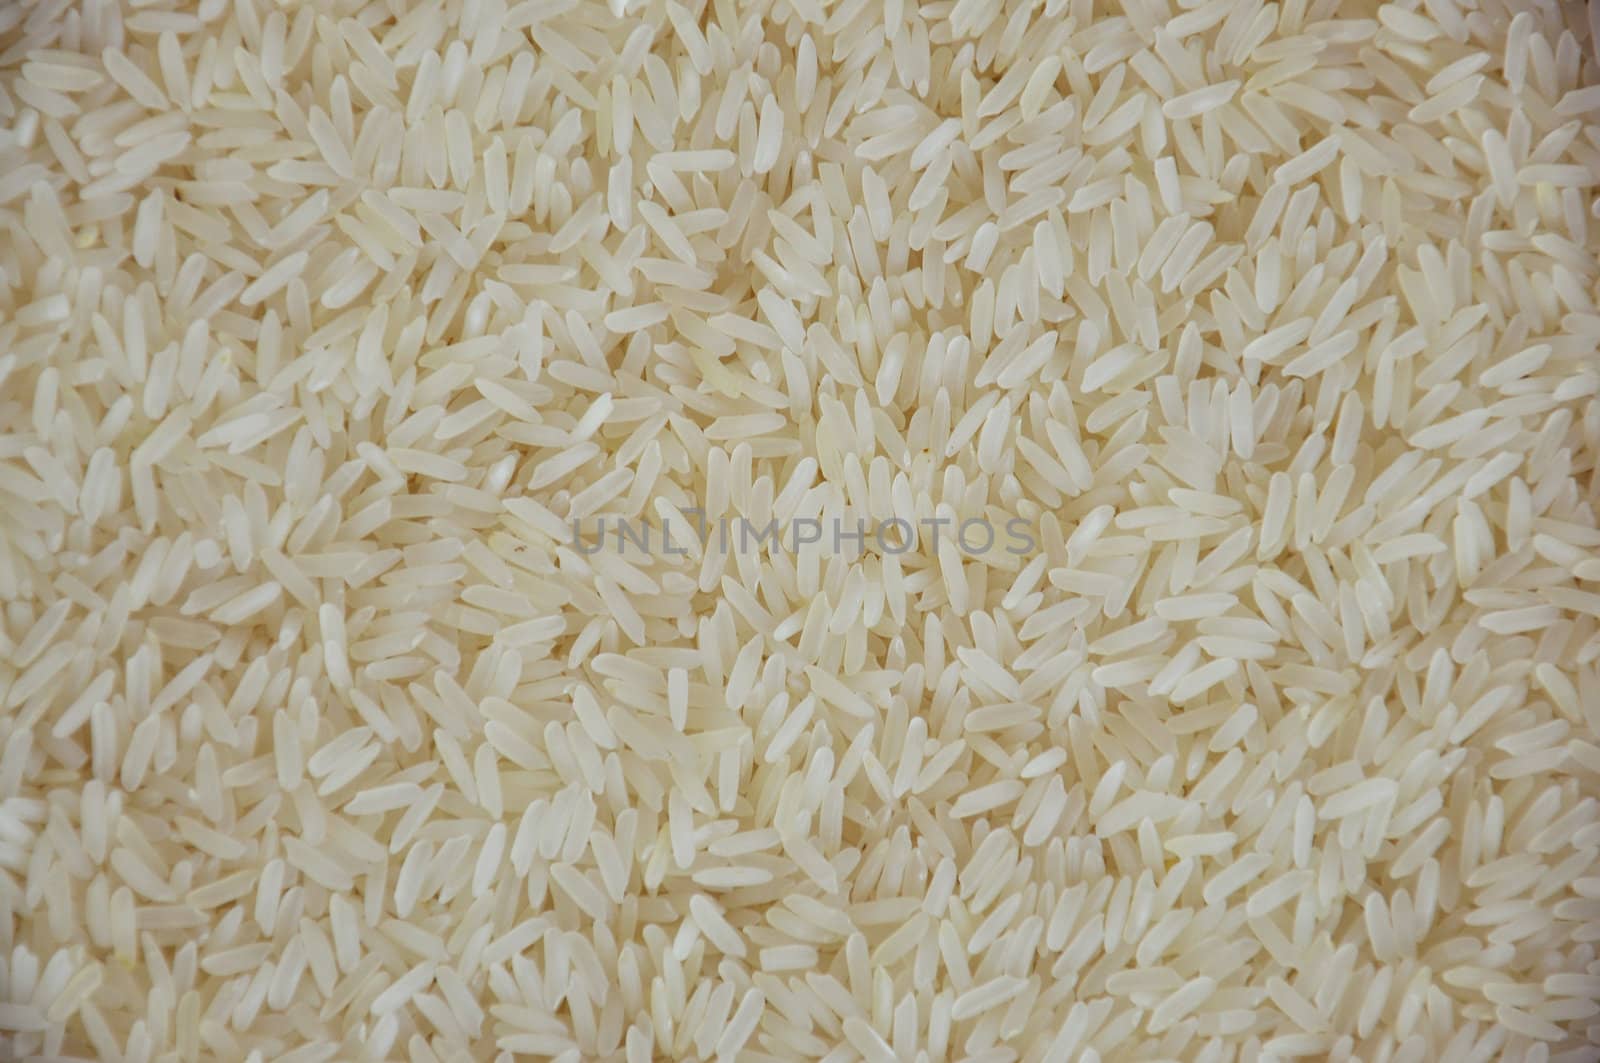 Rice is the seed of the monocot plants.